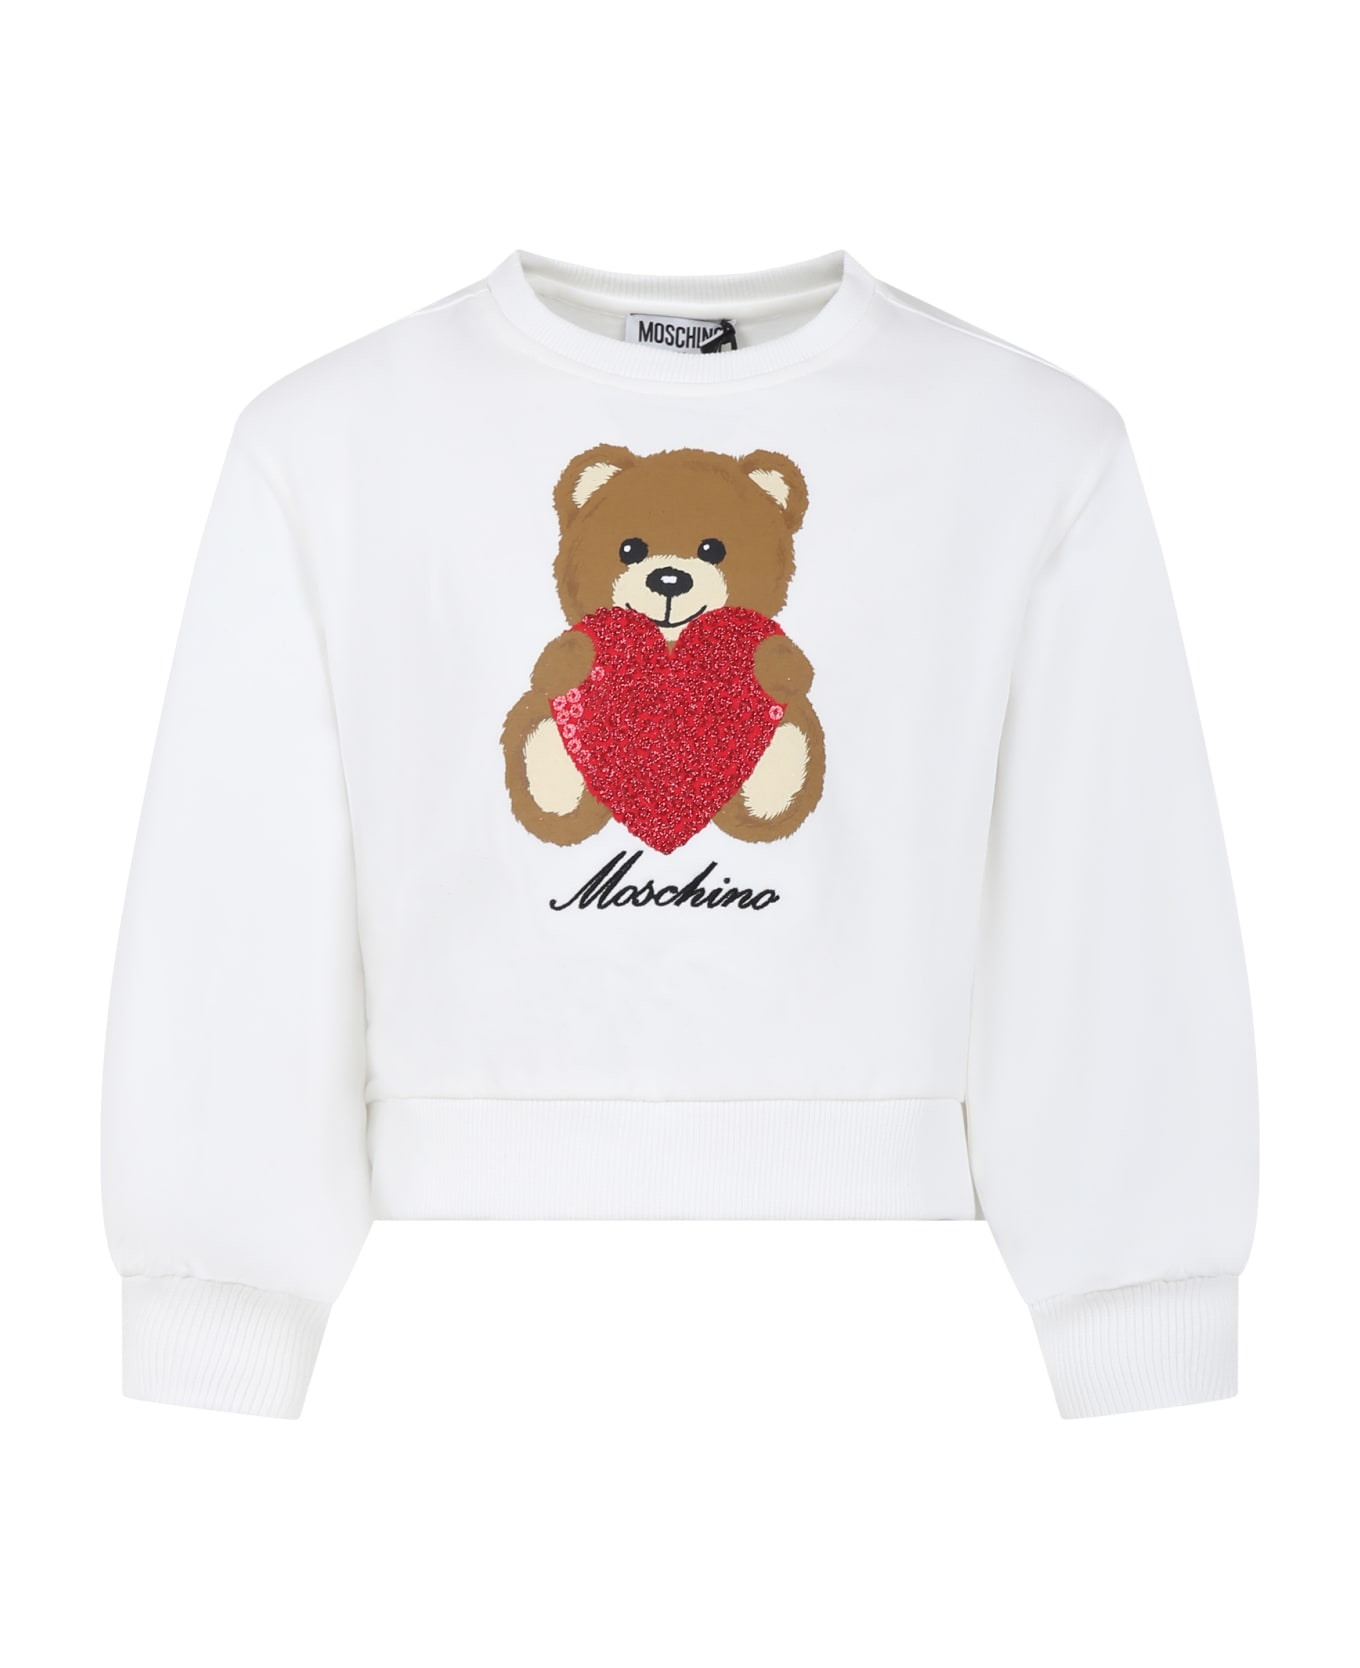 Moschino White Sweatshirt For Girl With Teddy Bear And Heart - White